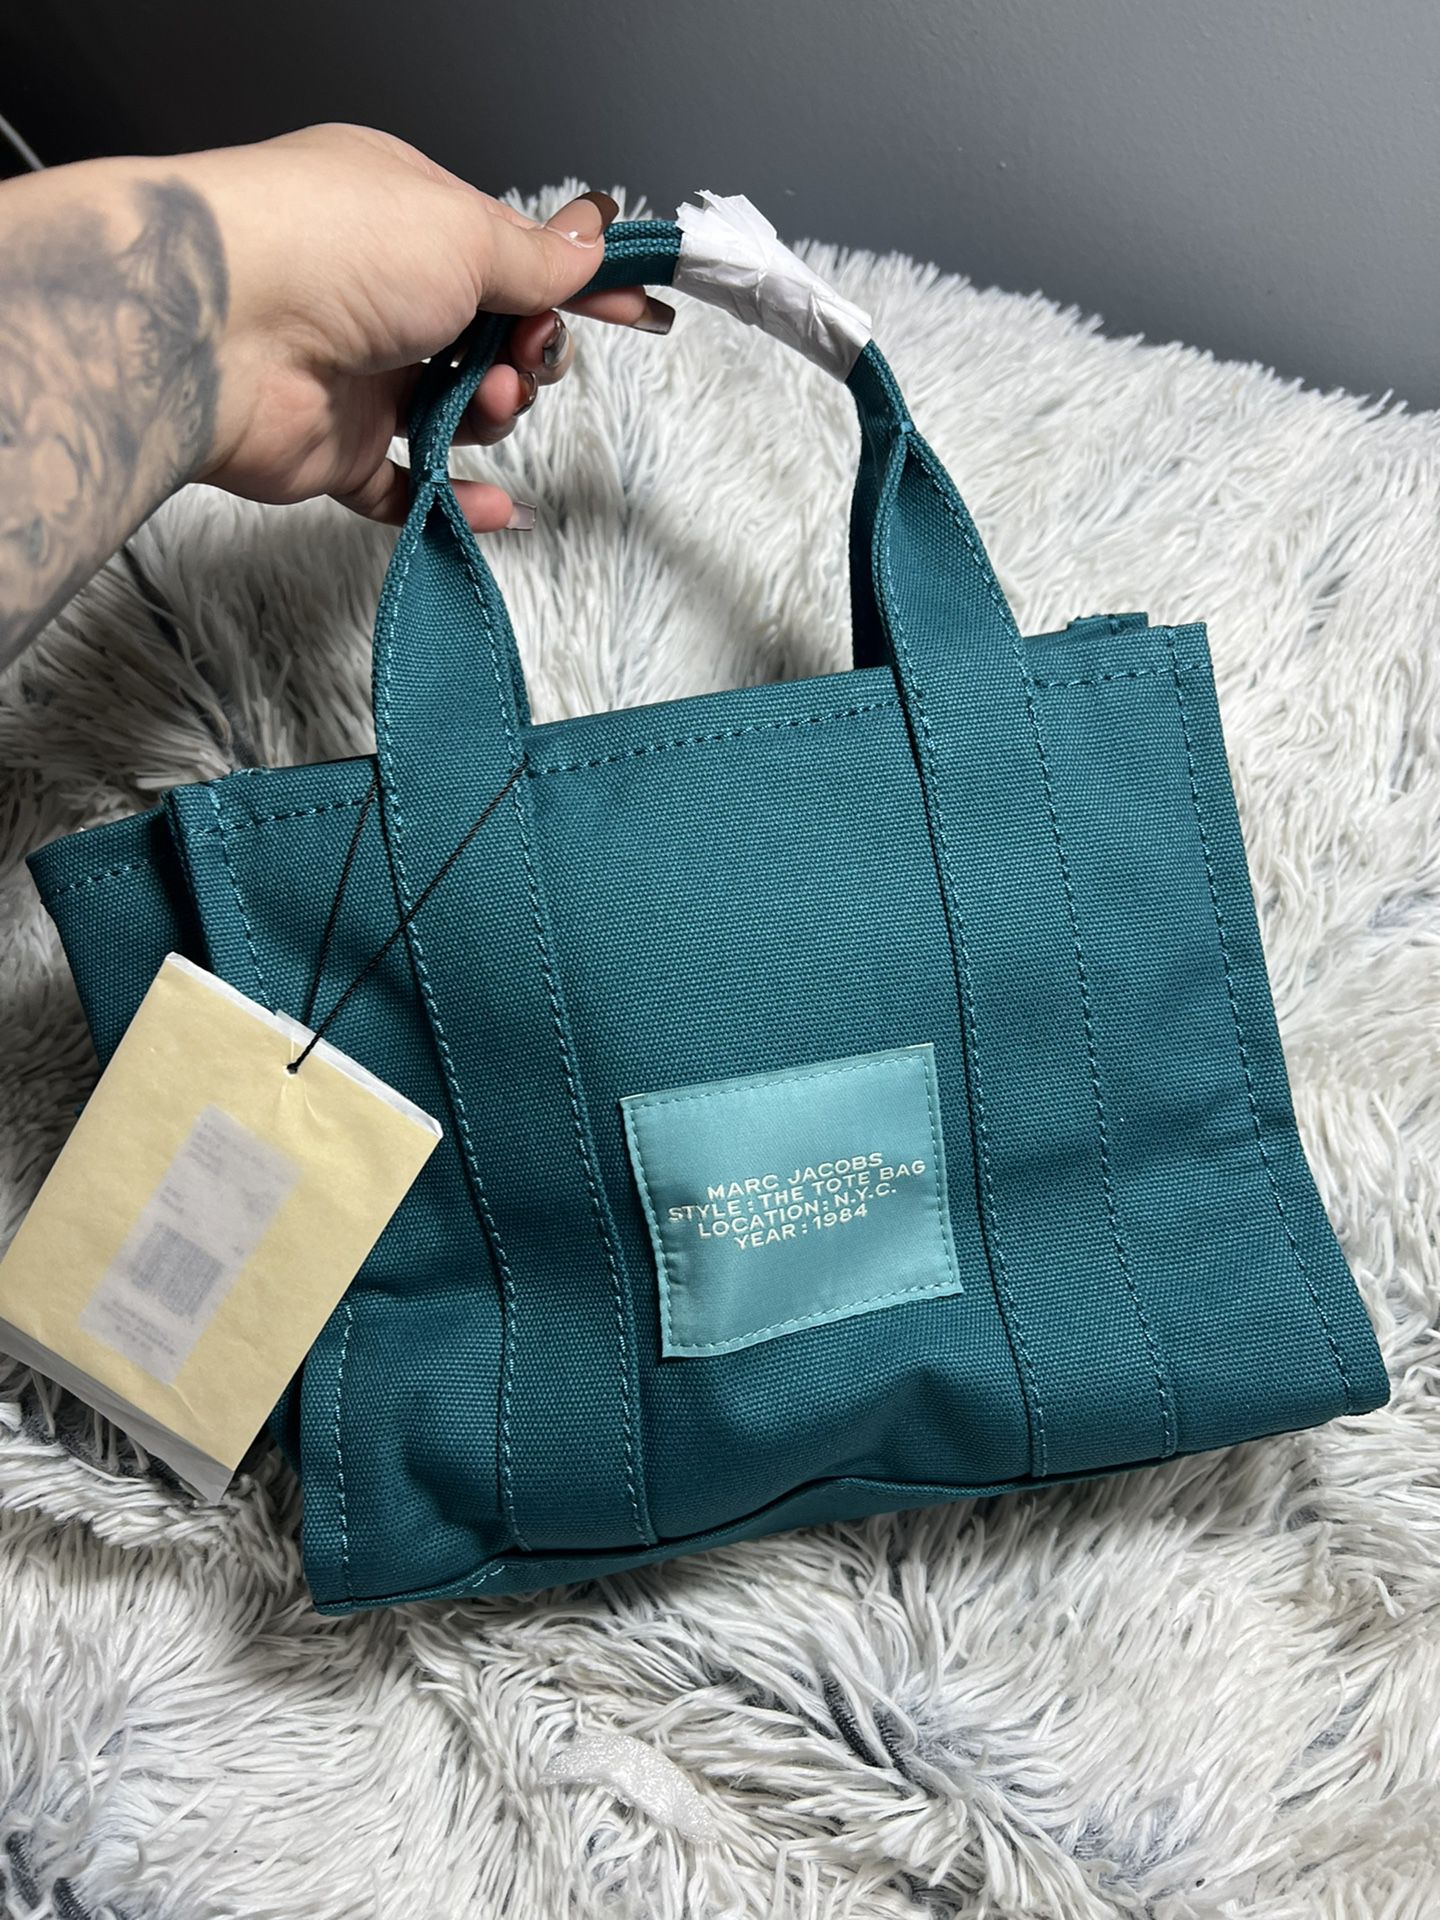 Hermes Fourre Tout Bag PM, Canvas Tote for Sale in Woodbury, NJ - OfferUp